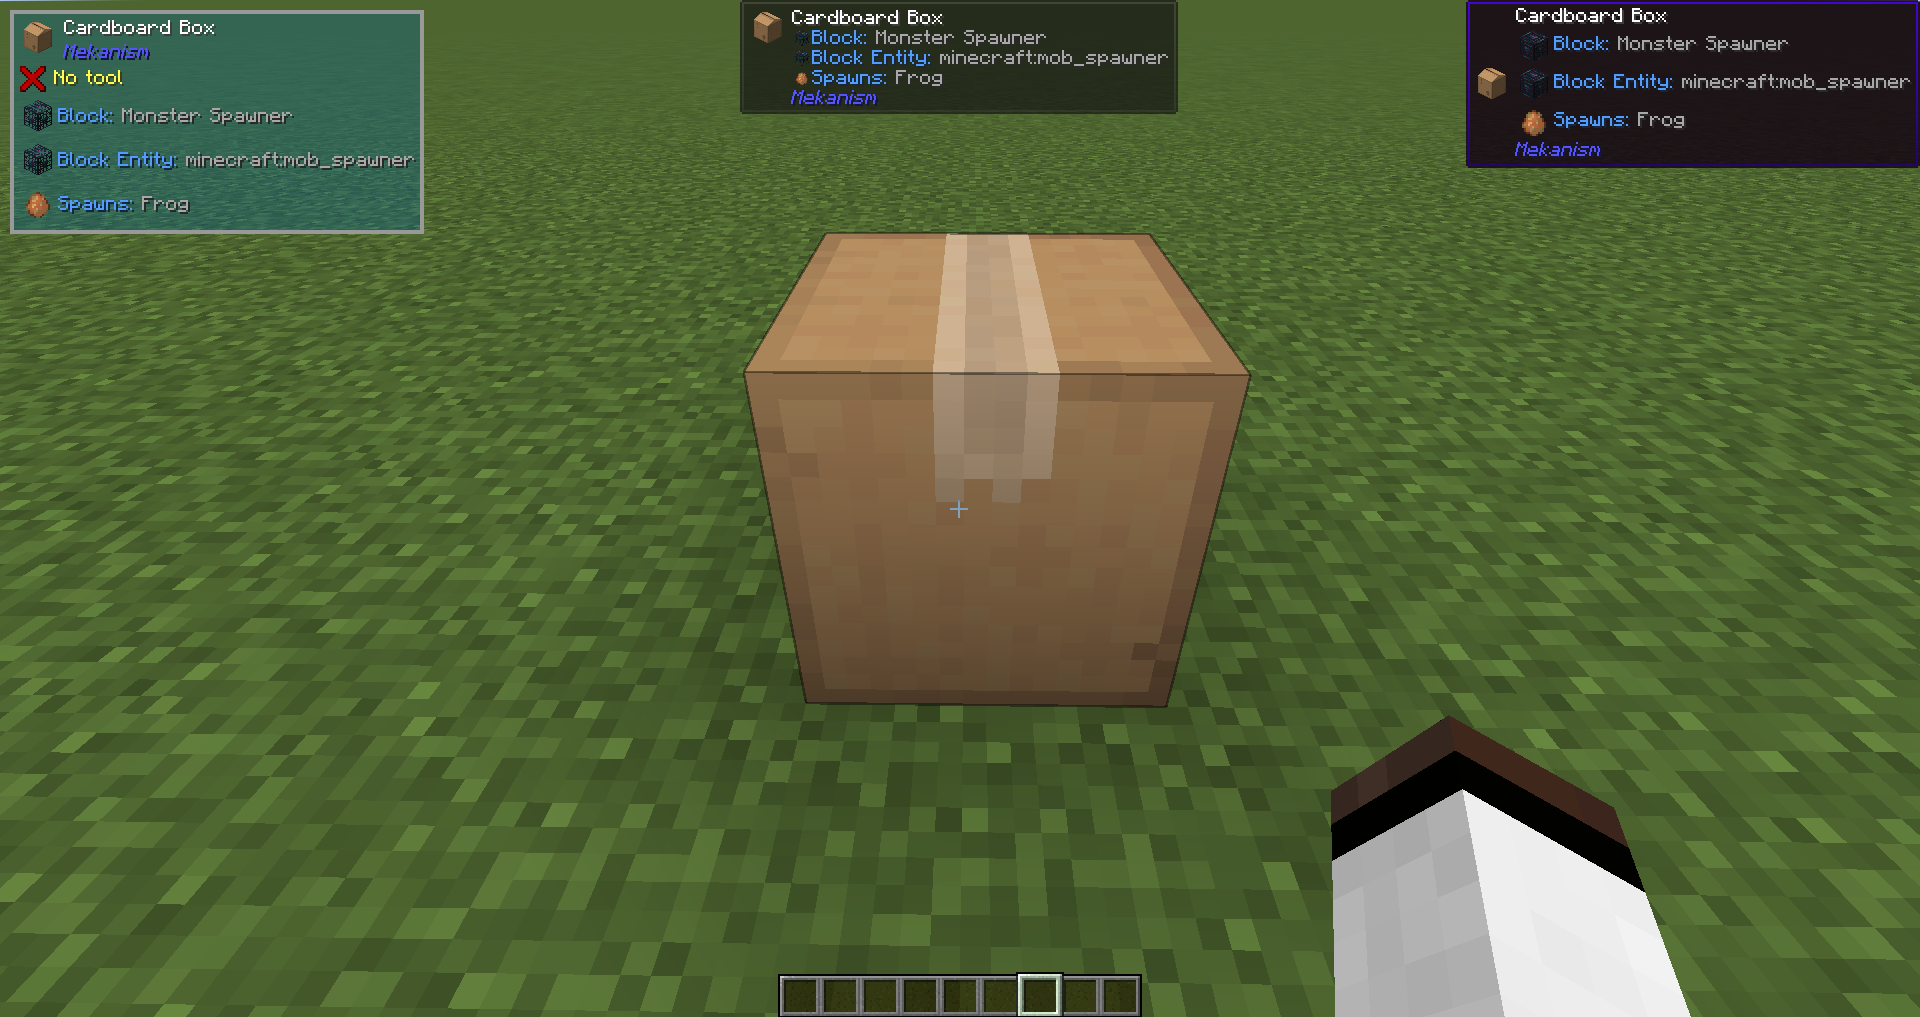 A Cardboard Box that contains a Monster Spawner (Frog)